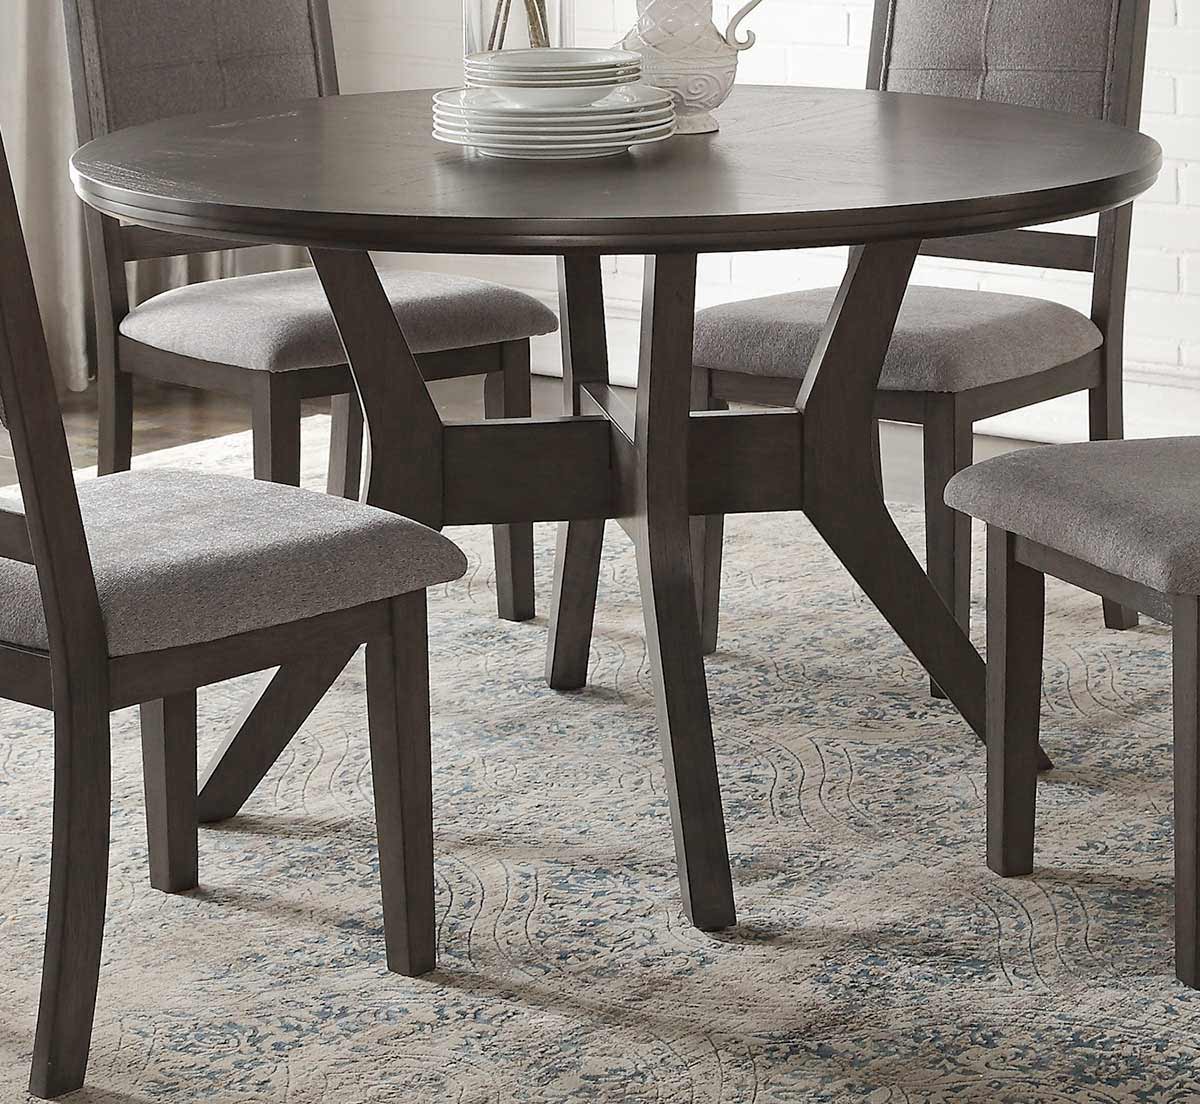 Homelegance Nisky Round Dining Table - Gray